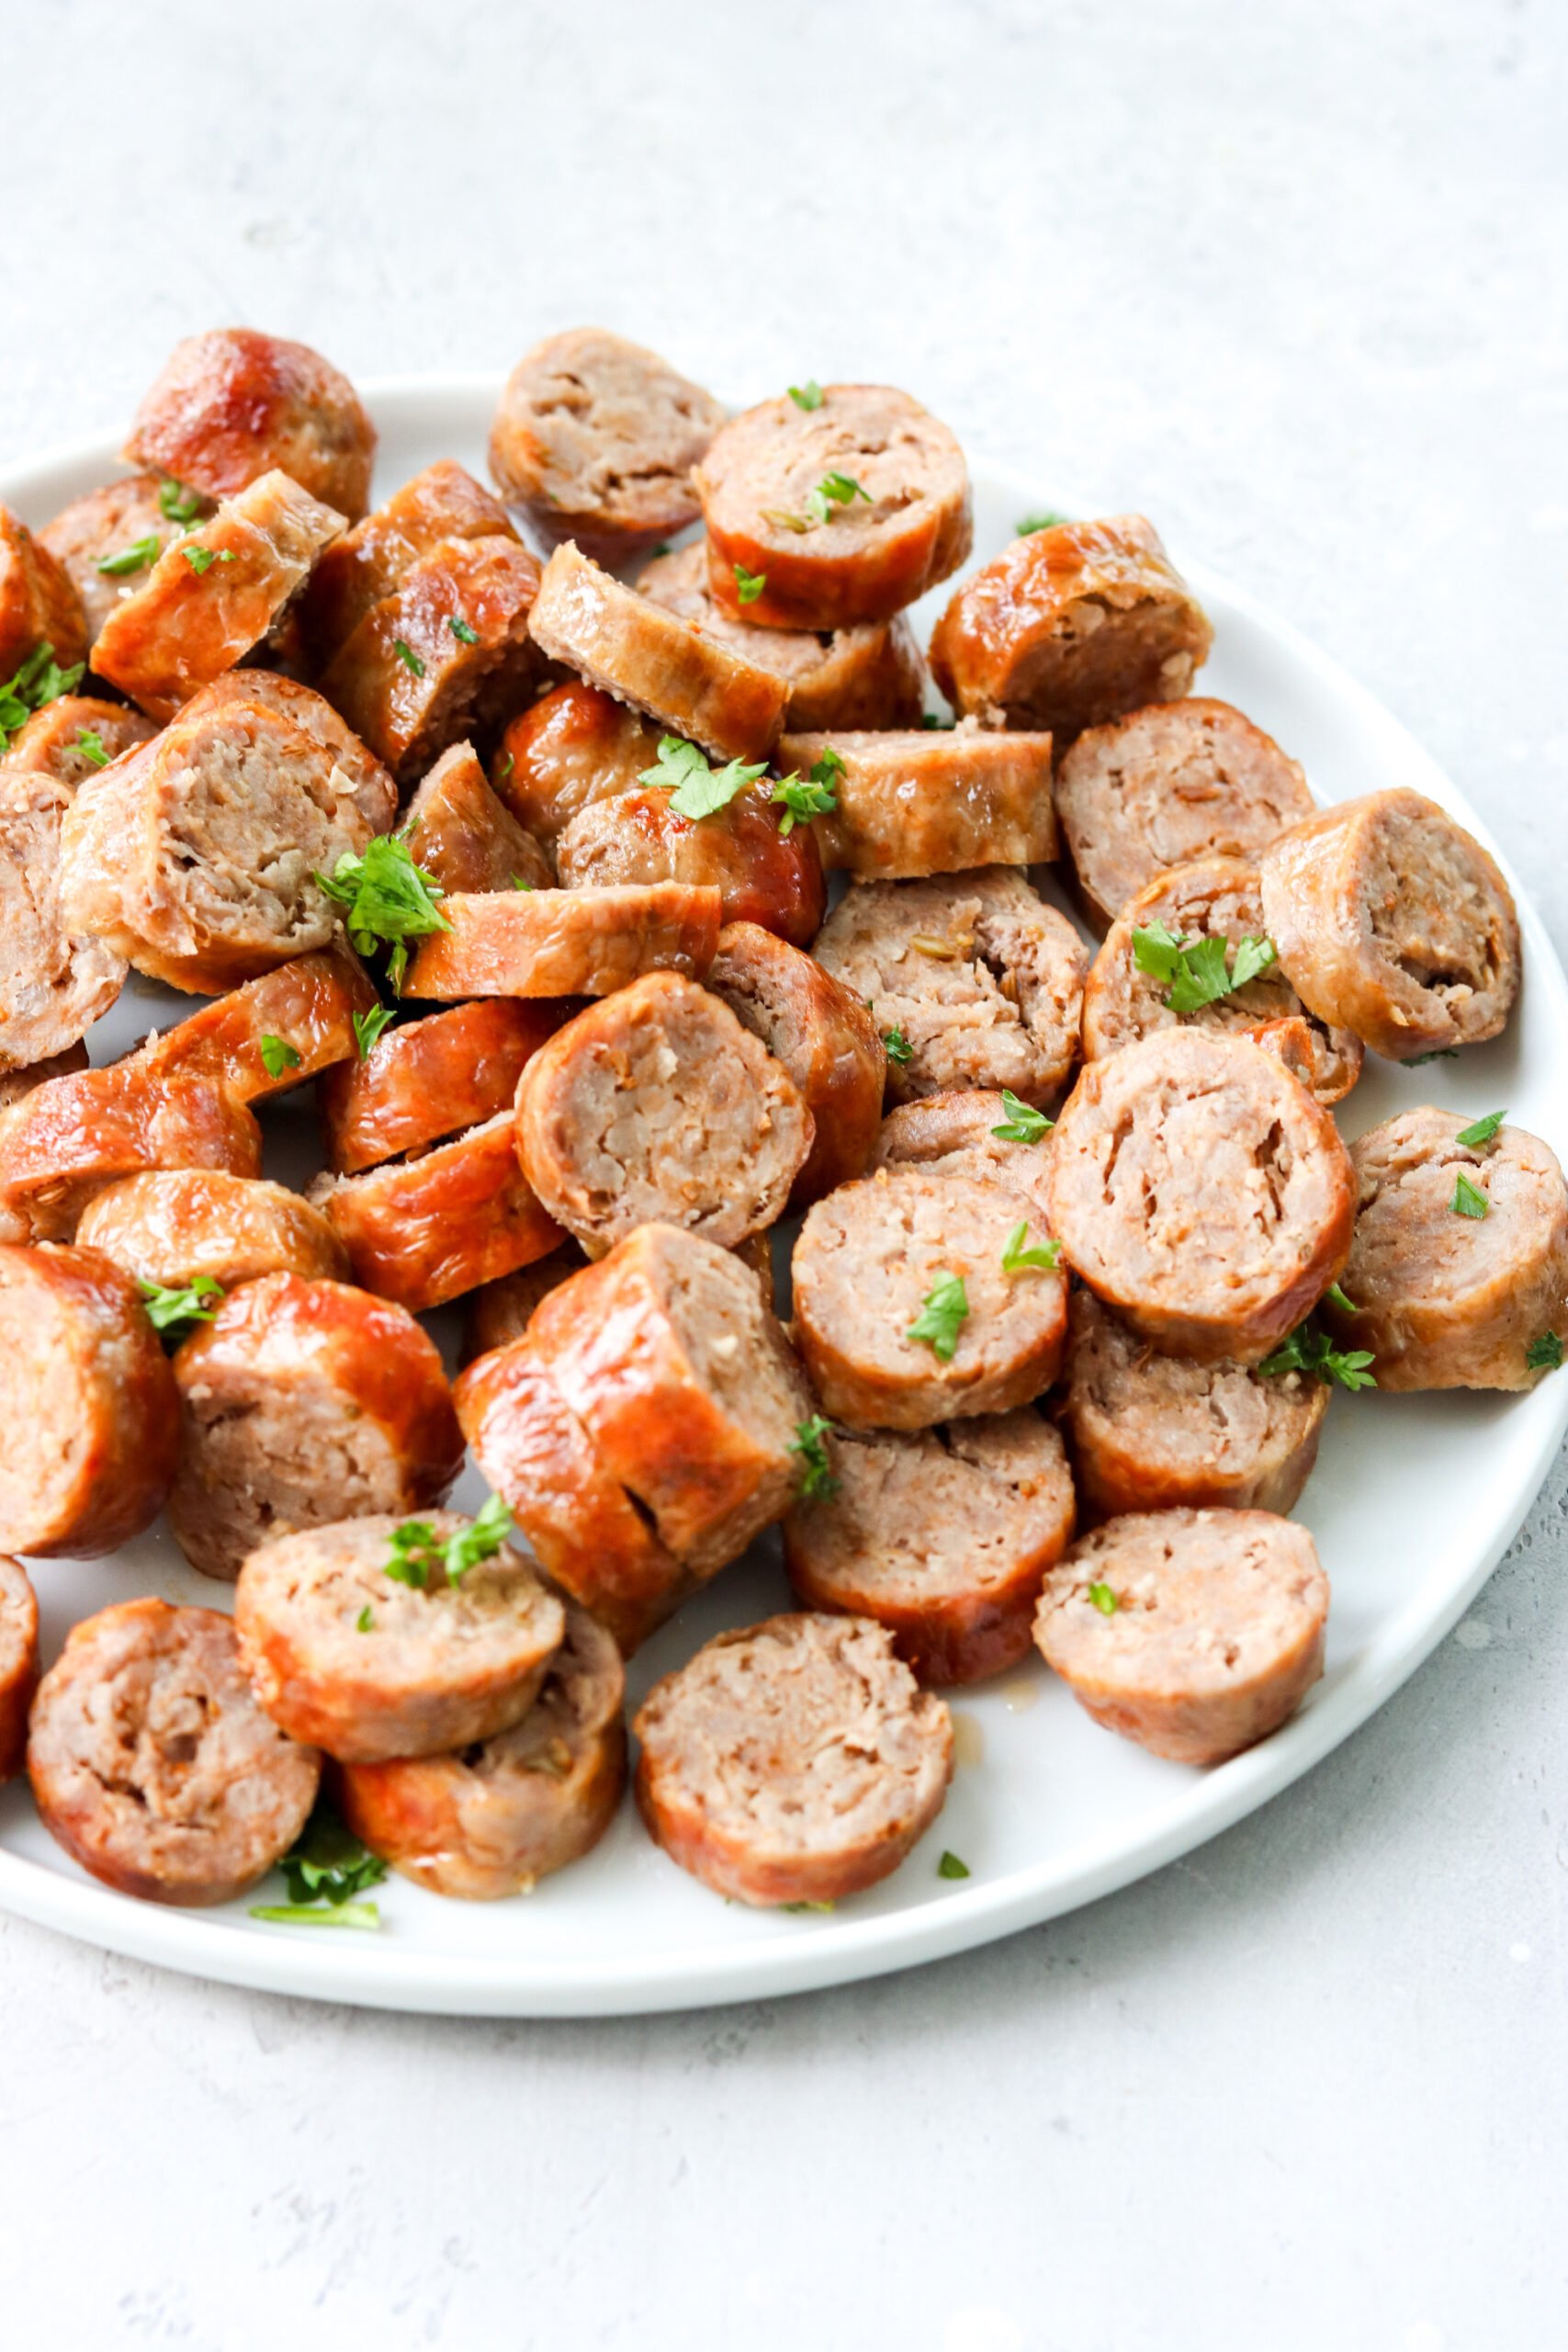 cut up Italian sausages on a white plate topped with parsley